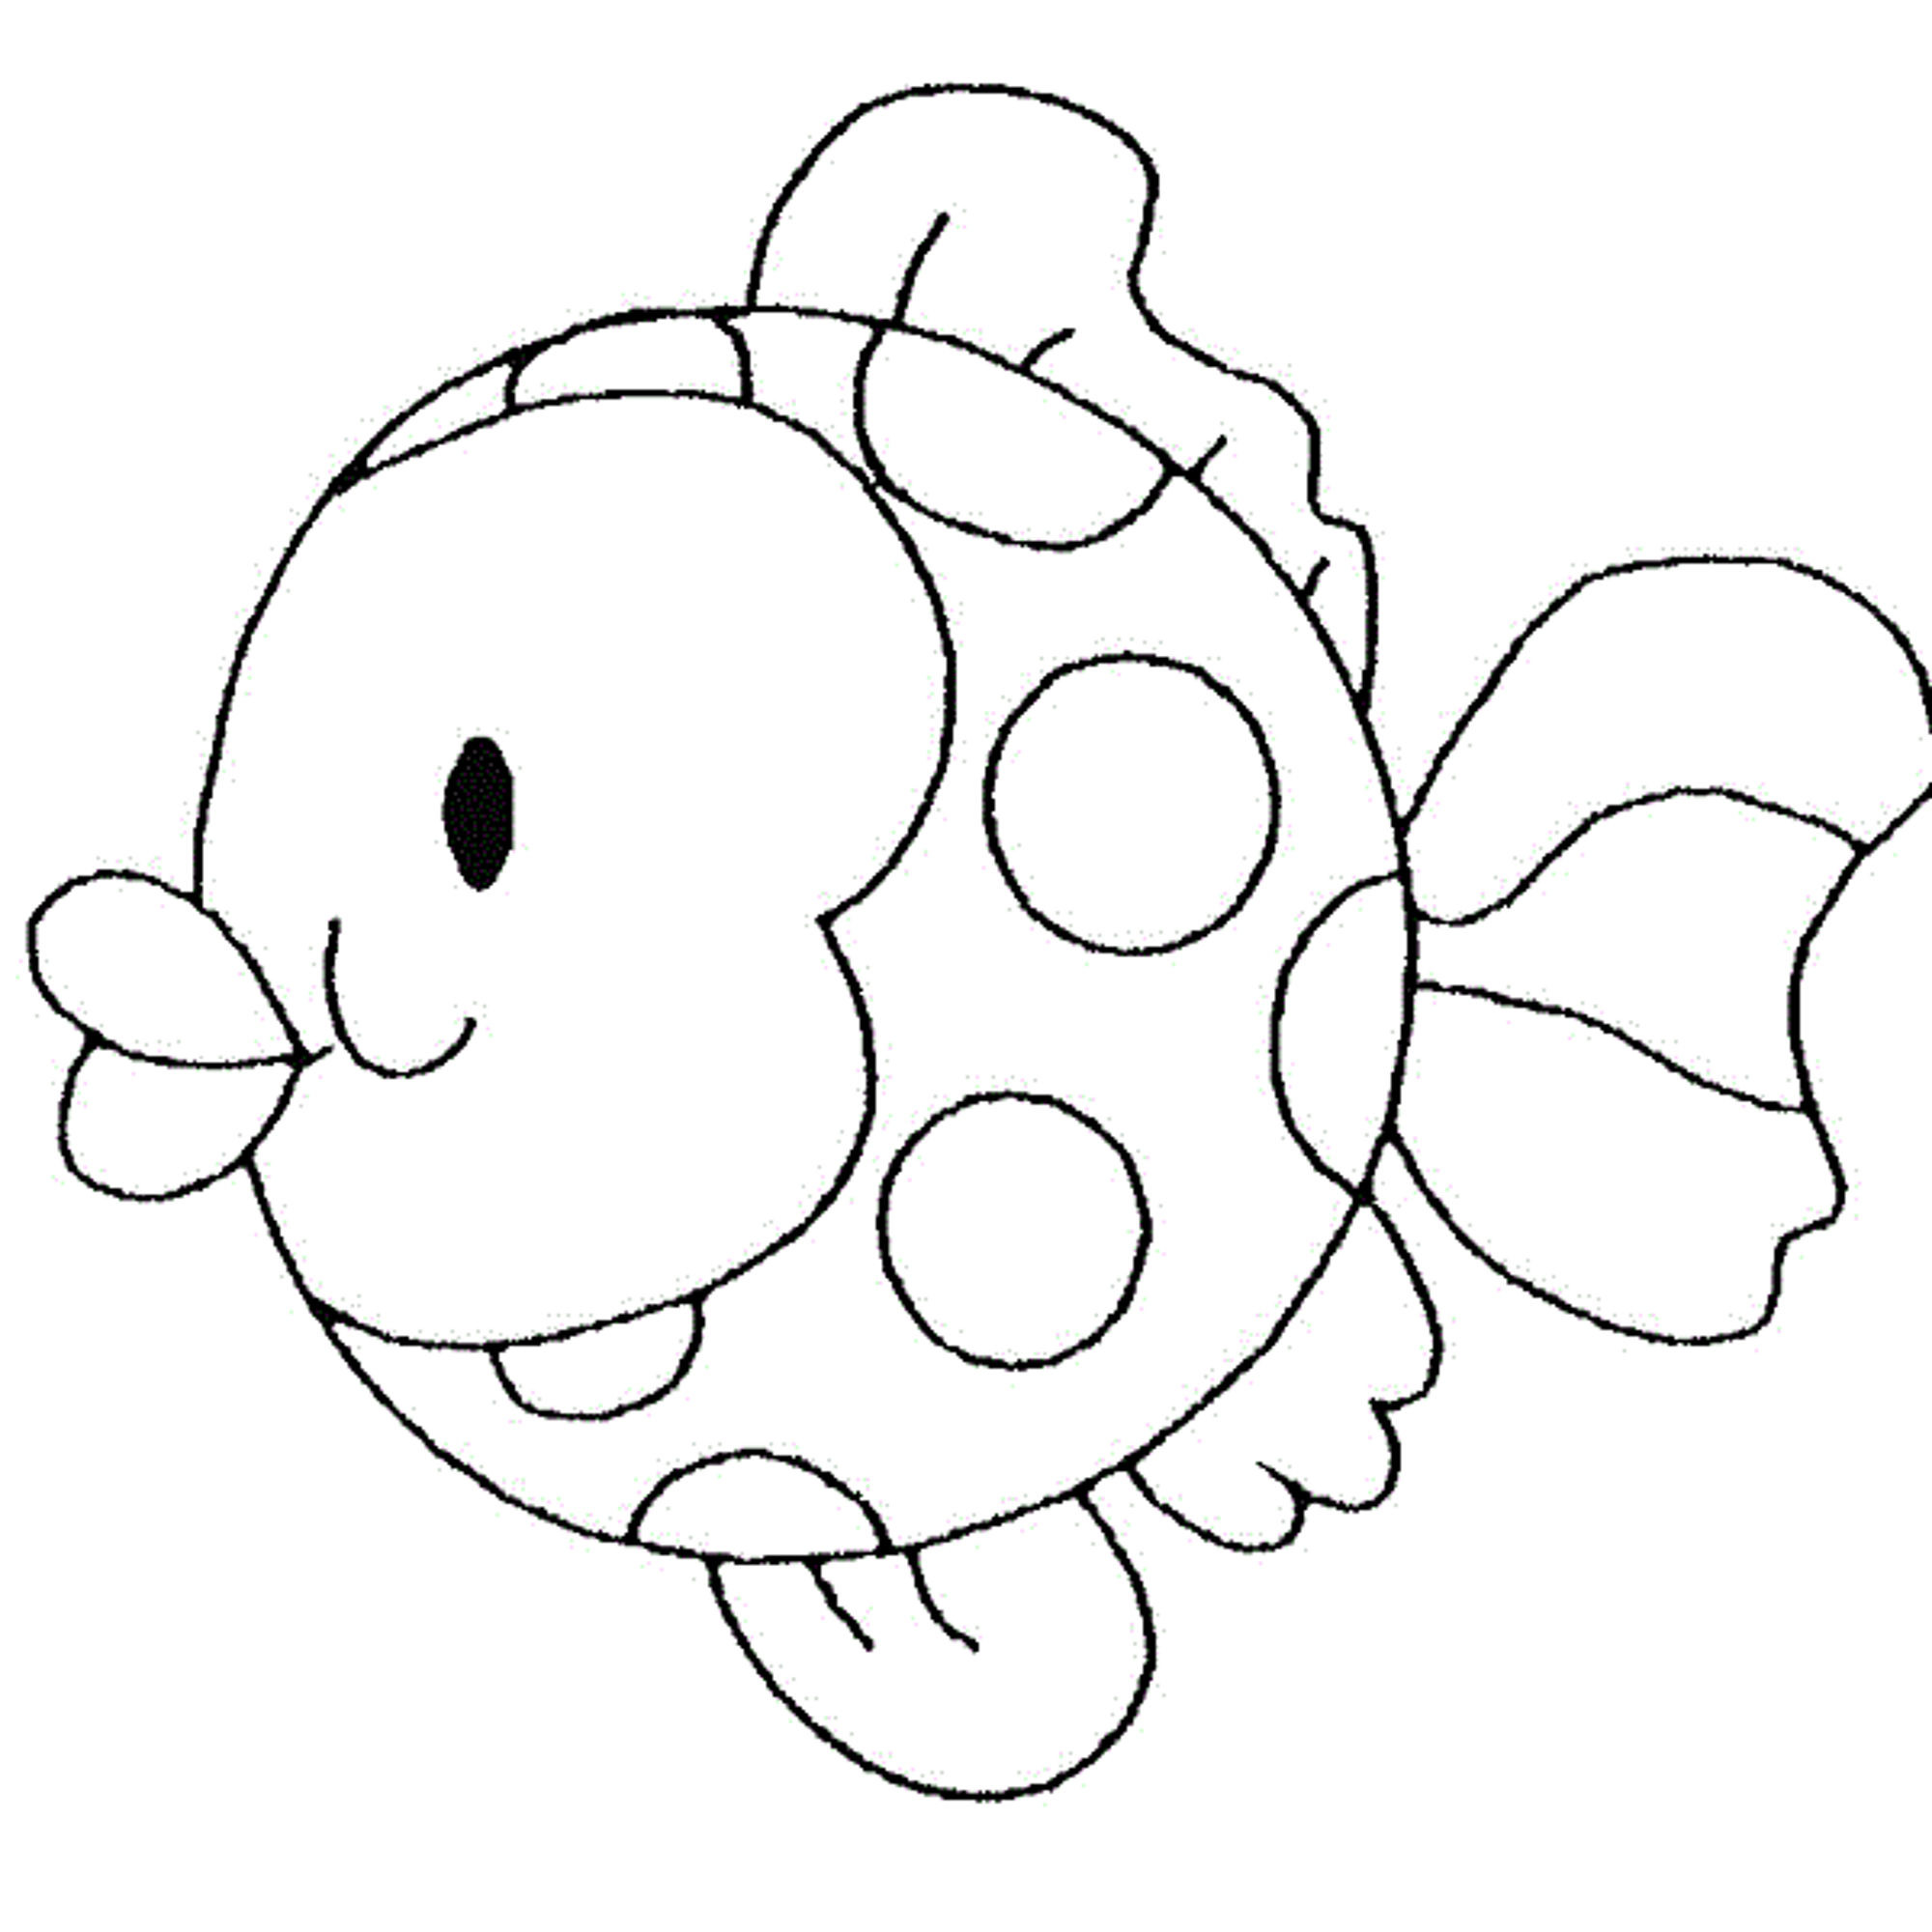 Coloring Pages Fish For Kids
 Print & Download Cute and Educative Fish Coloring Pages